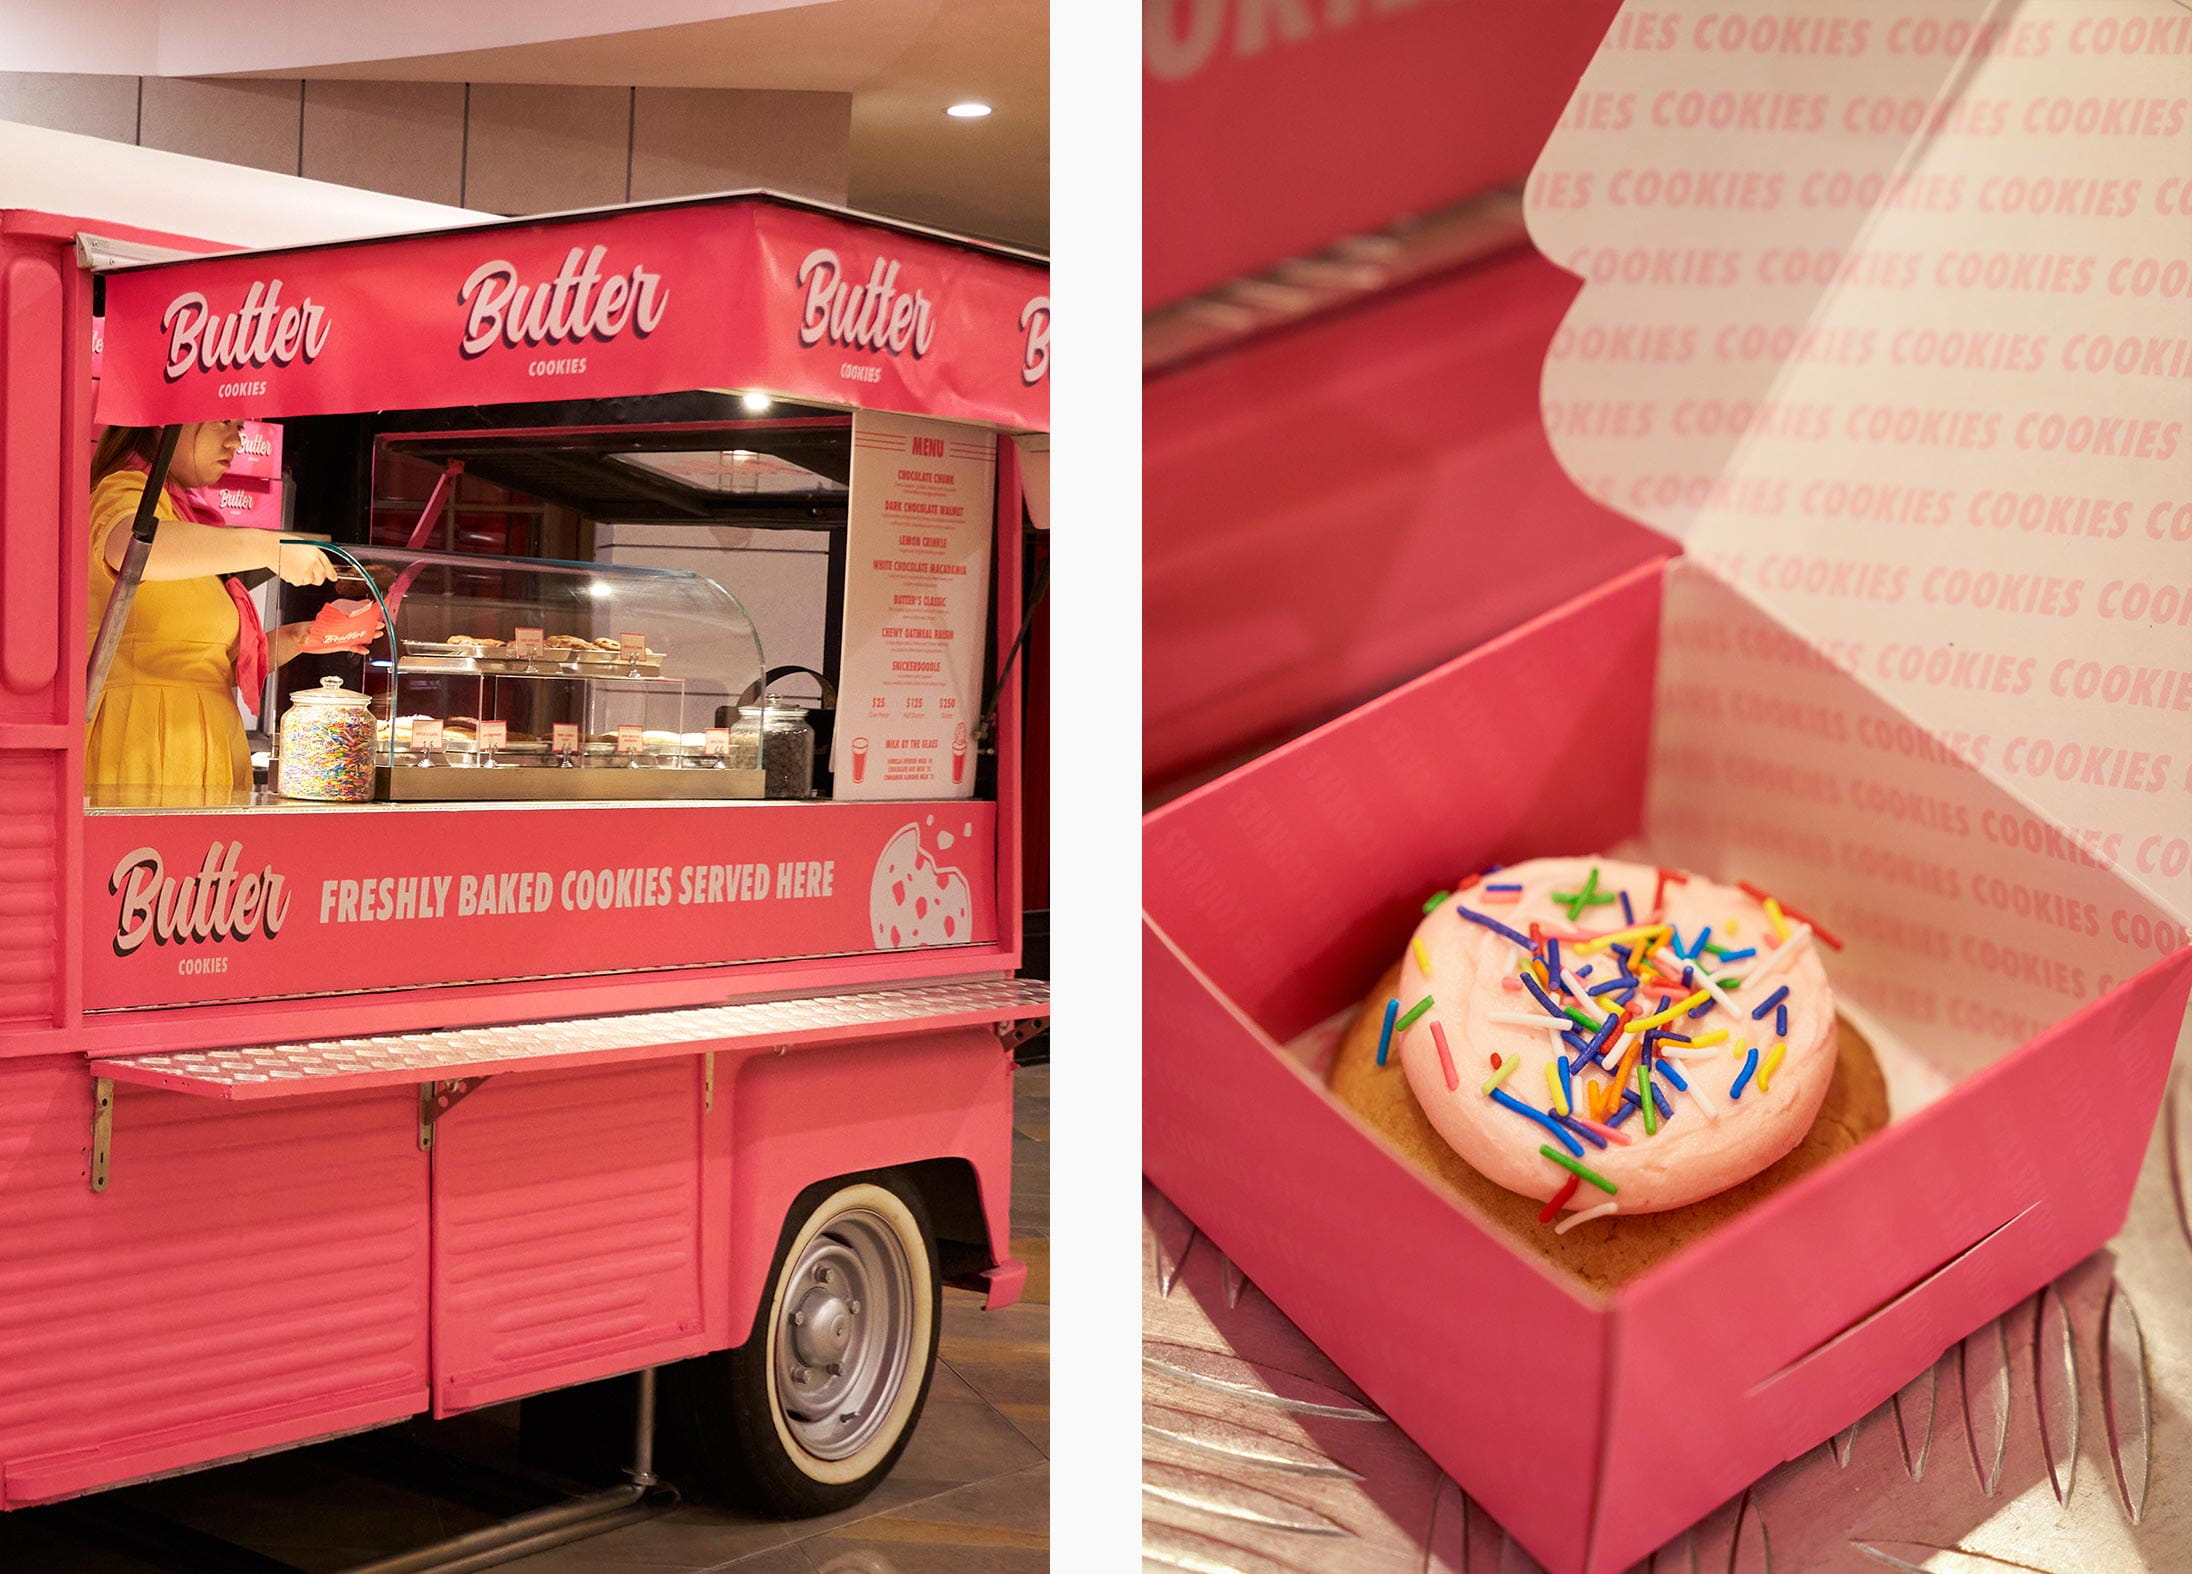 The Black Sheep Restaurants Group Butter Cookies truck at Pacific Place